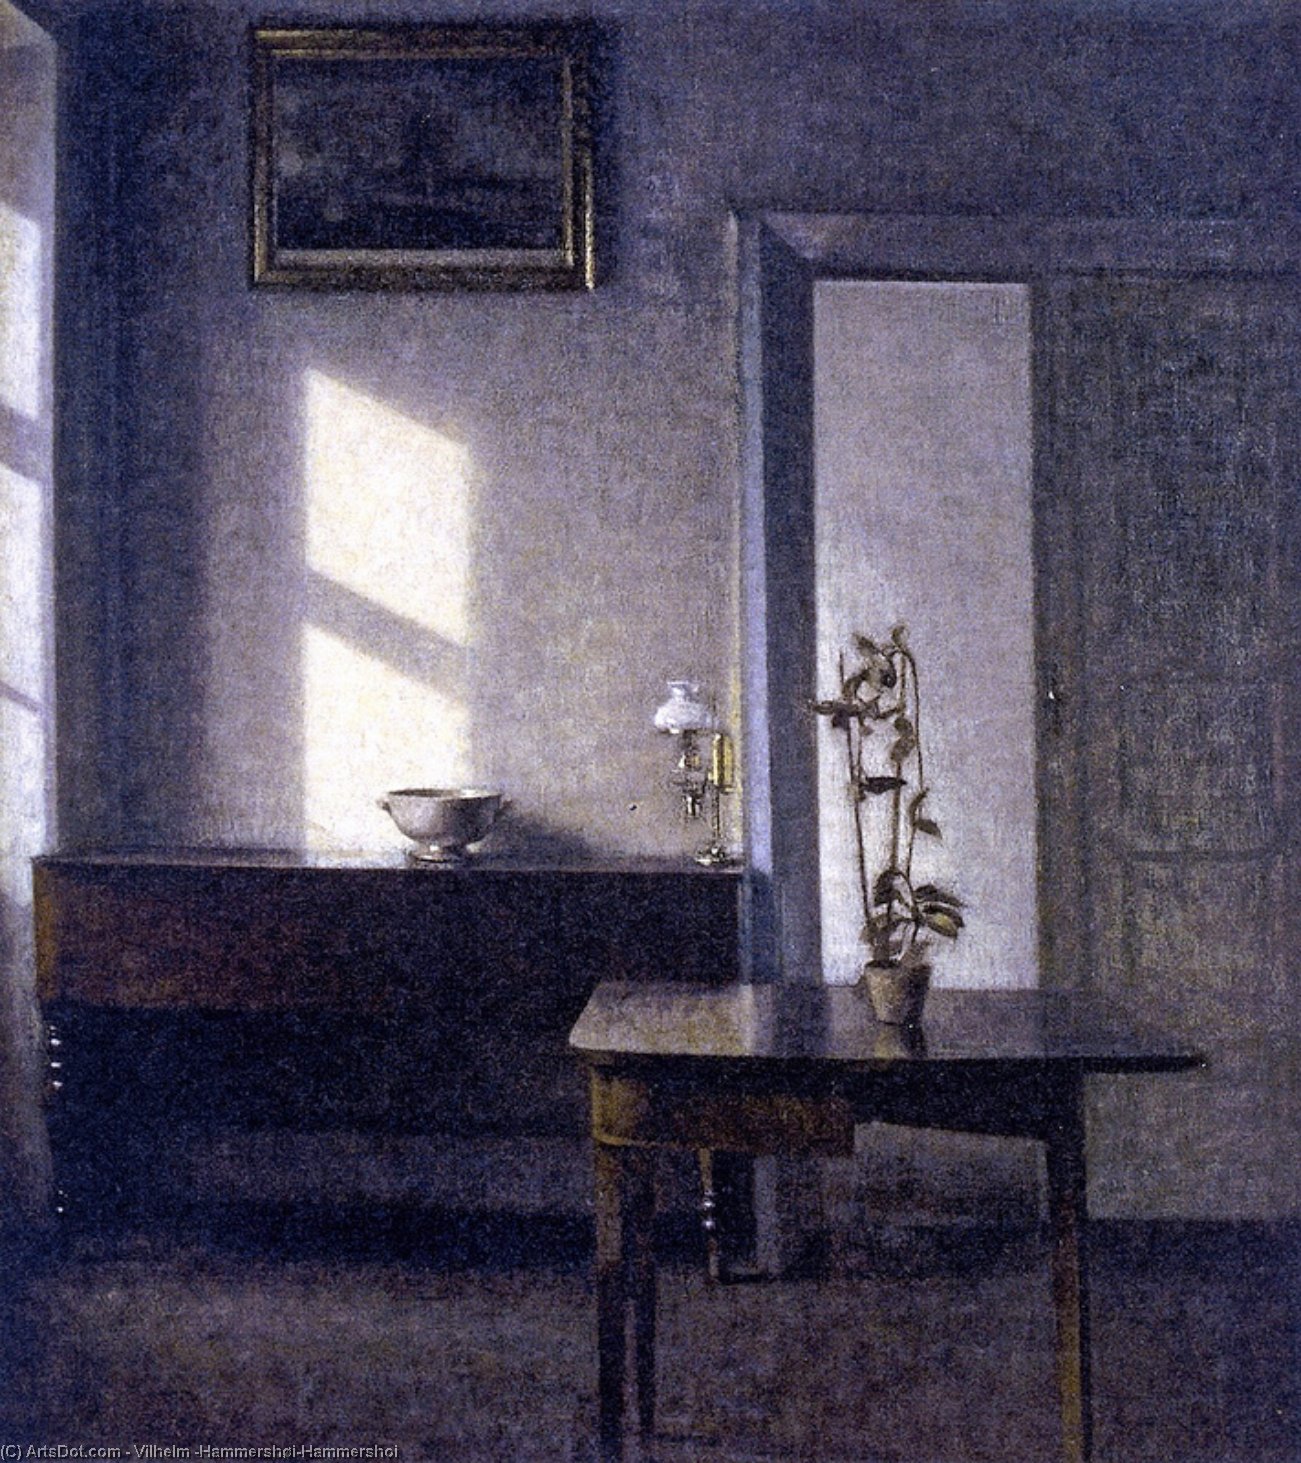 Buy Museum Art Reproductions Interior with Potted Plant on Card Table, Bregade 25, 1910 by Vilhelm (Hammershøi)Hammershoi (1864-1916, Denmark) | ArtsDot.com